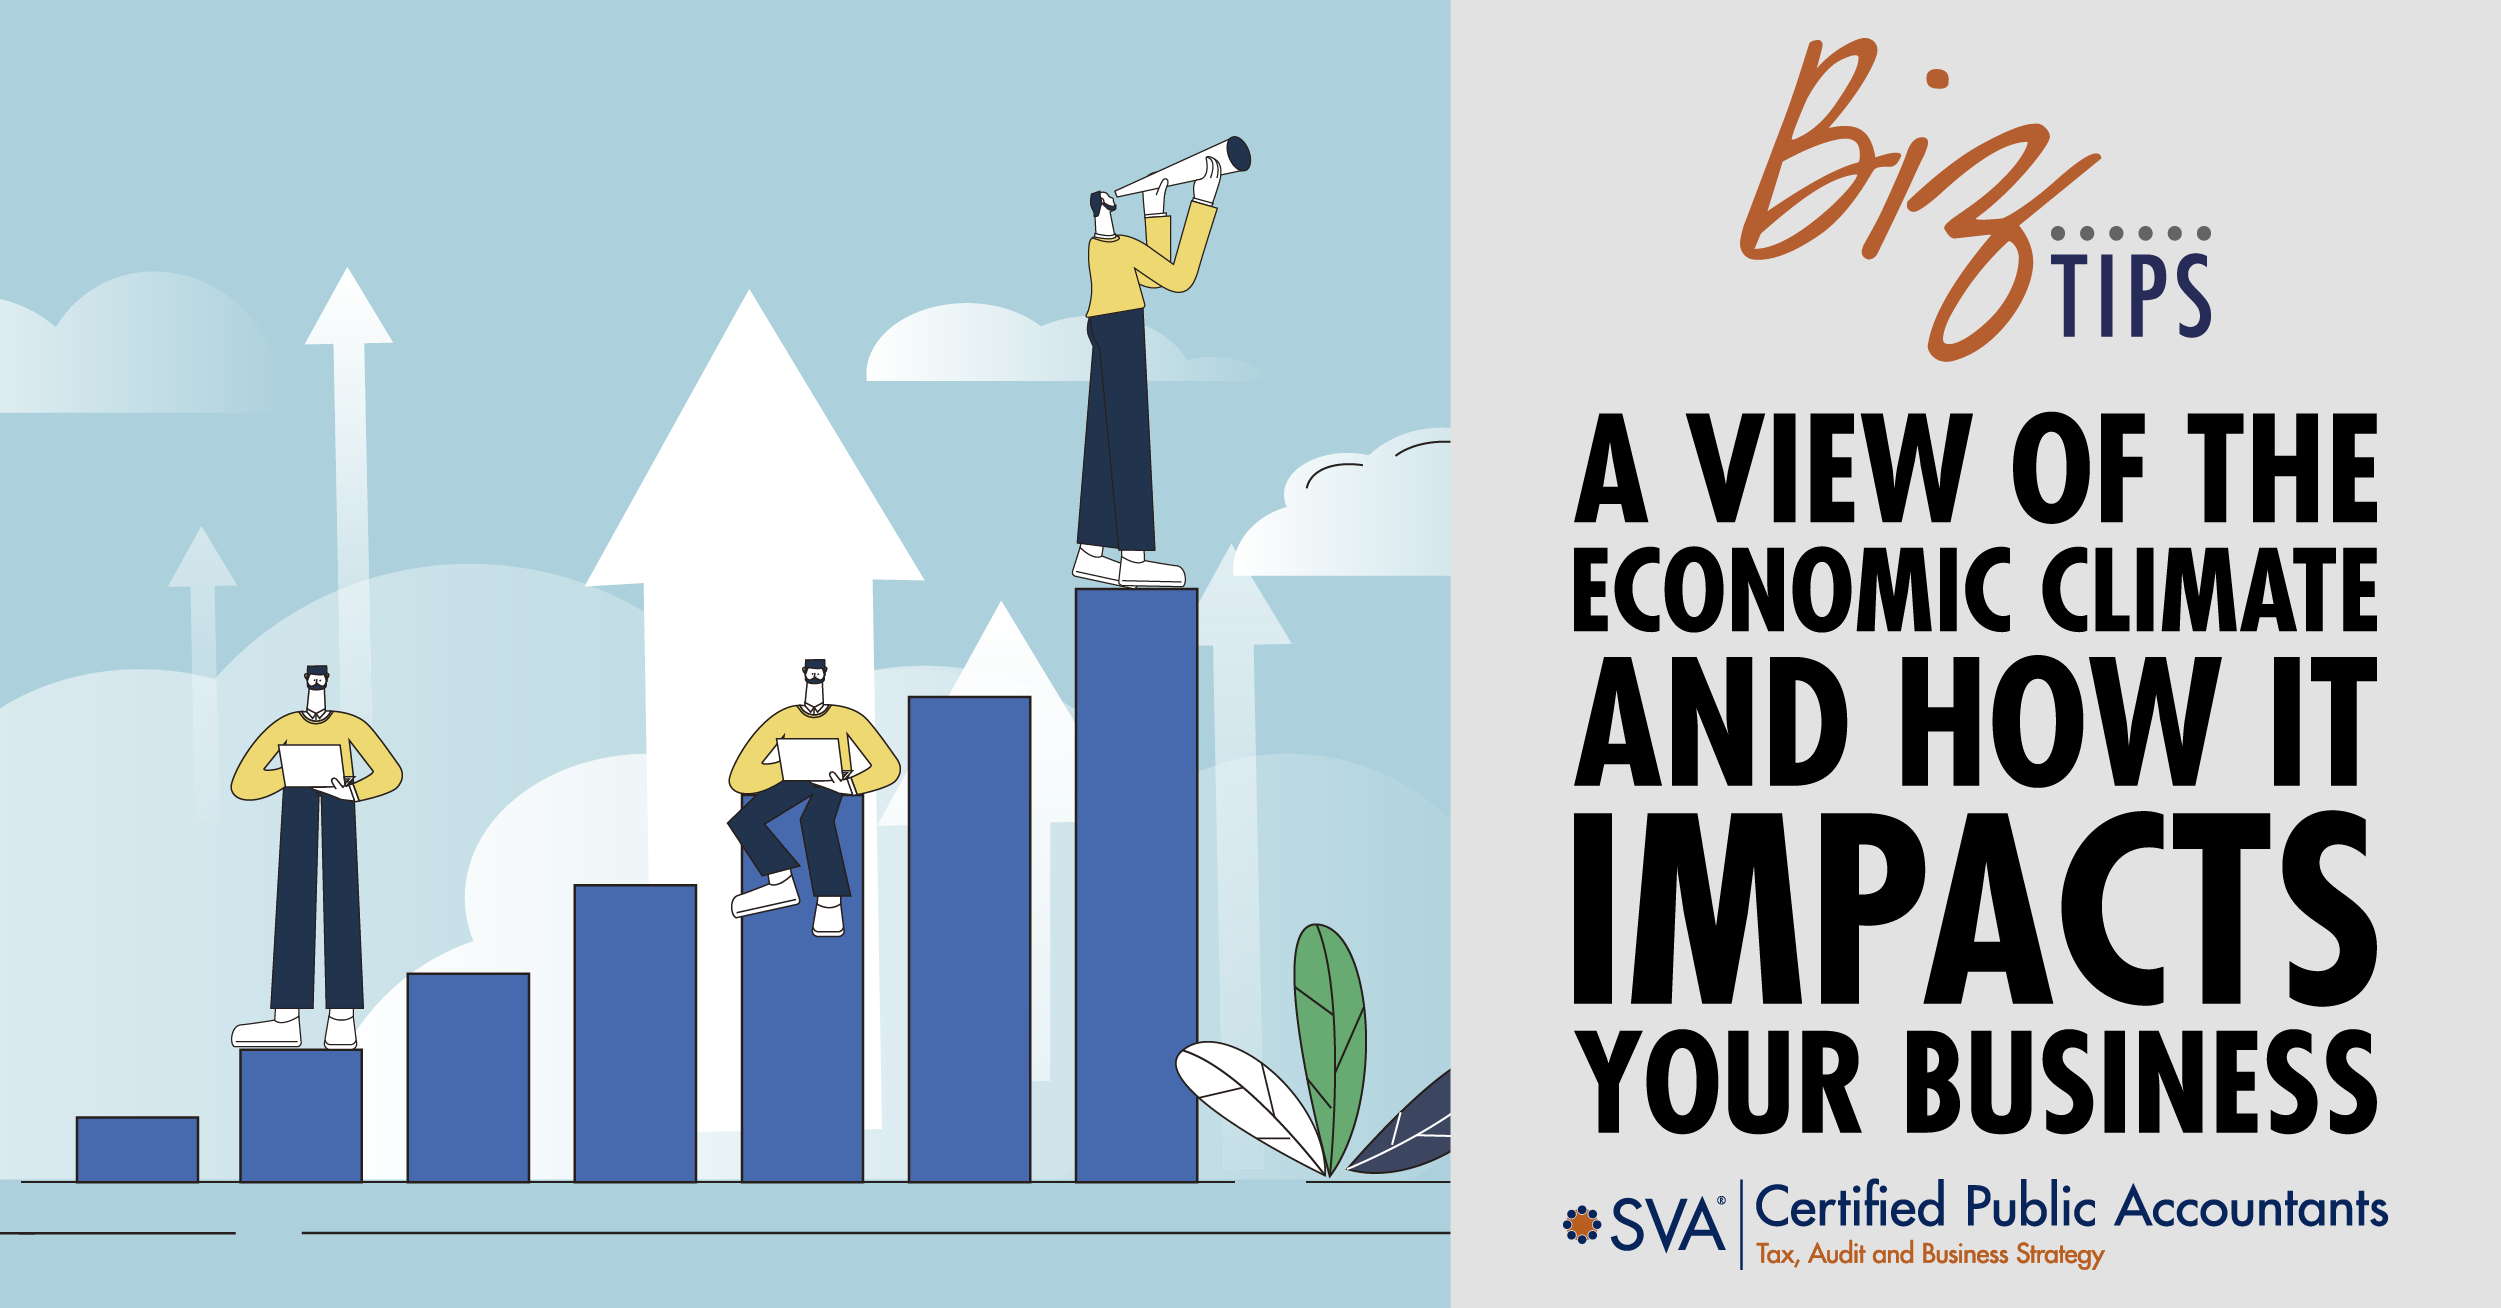 A View of the Economic Climate and How It Impacts Your Business